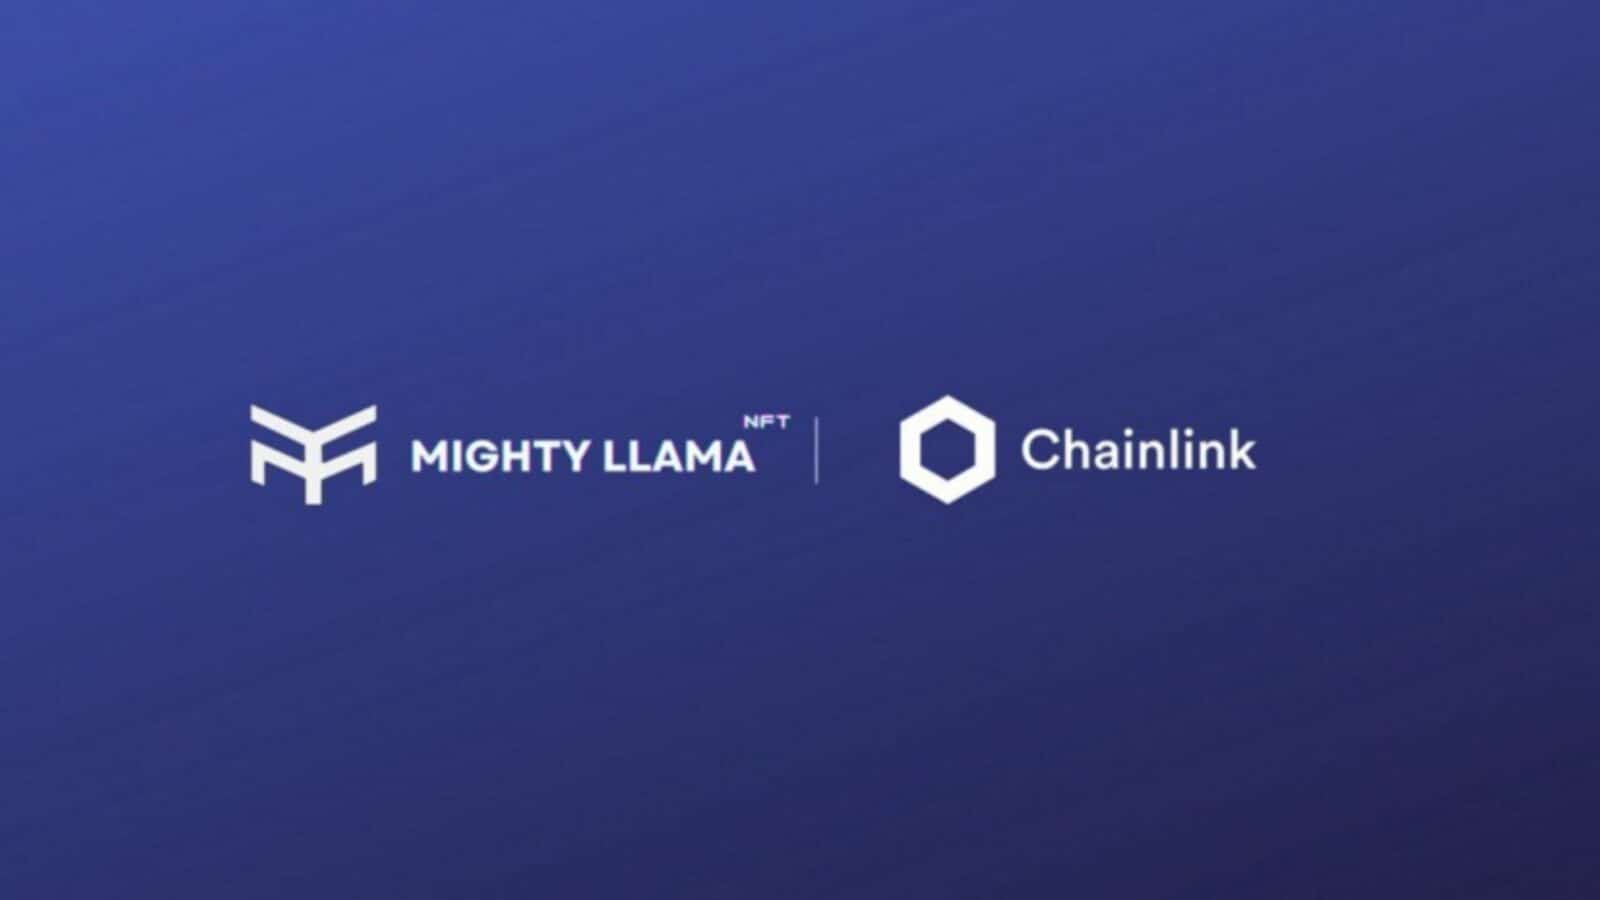 Mighty Llama Integrates Chainlink VRF and Automation to Help Power Lucky Draw Games